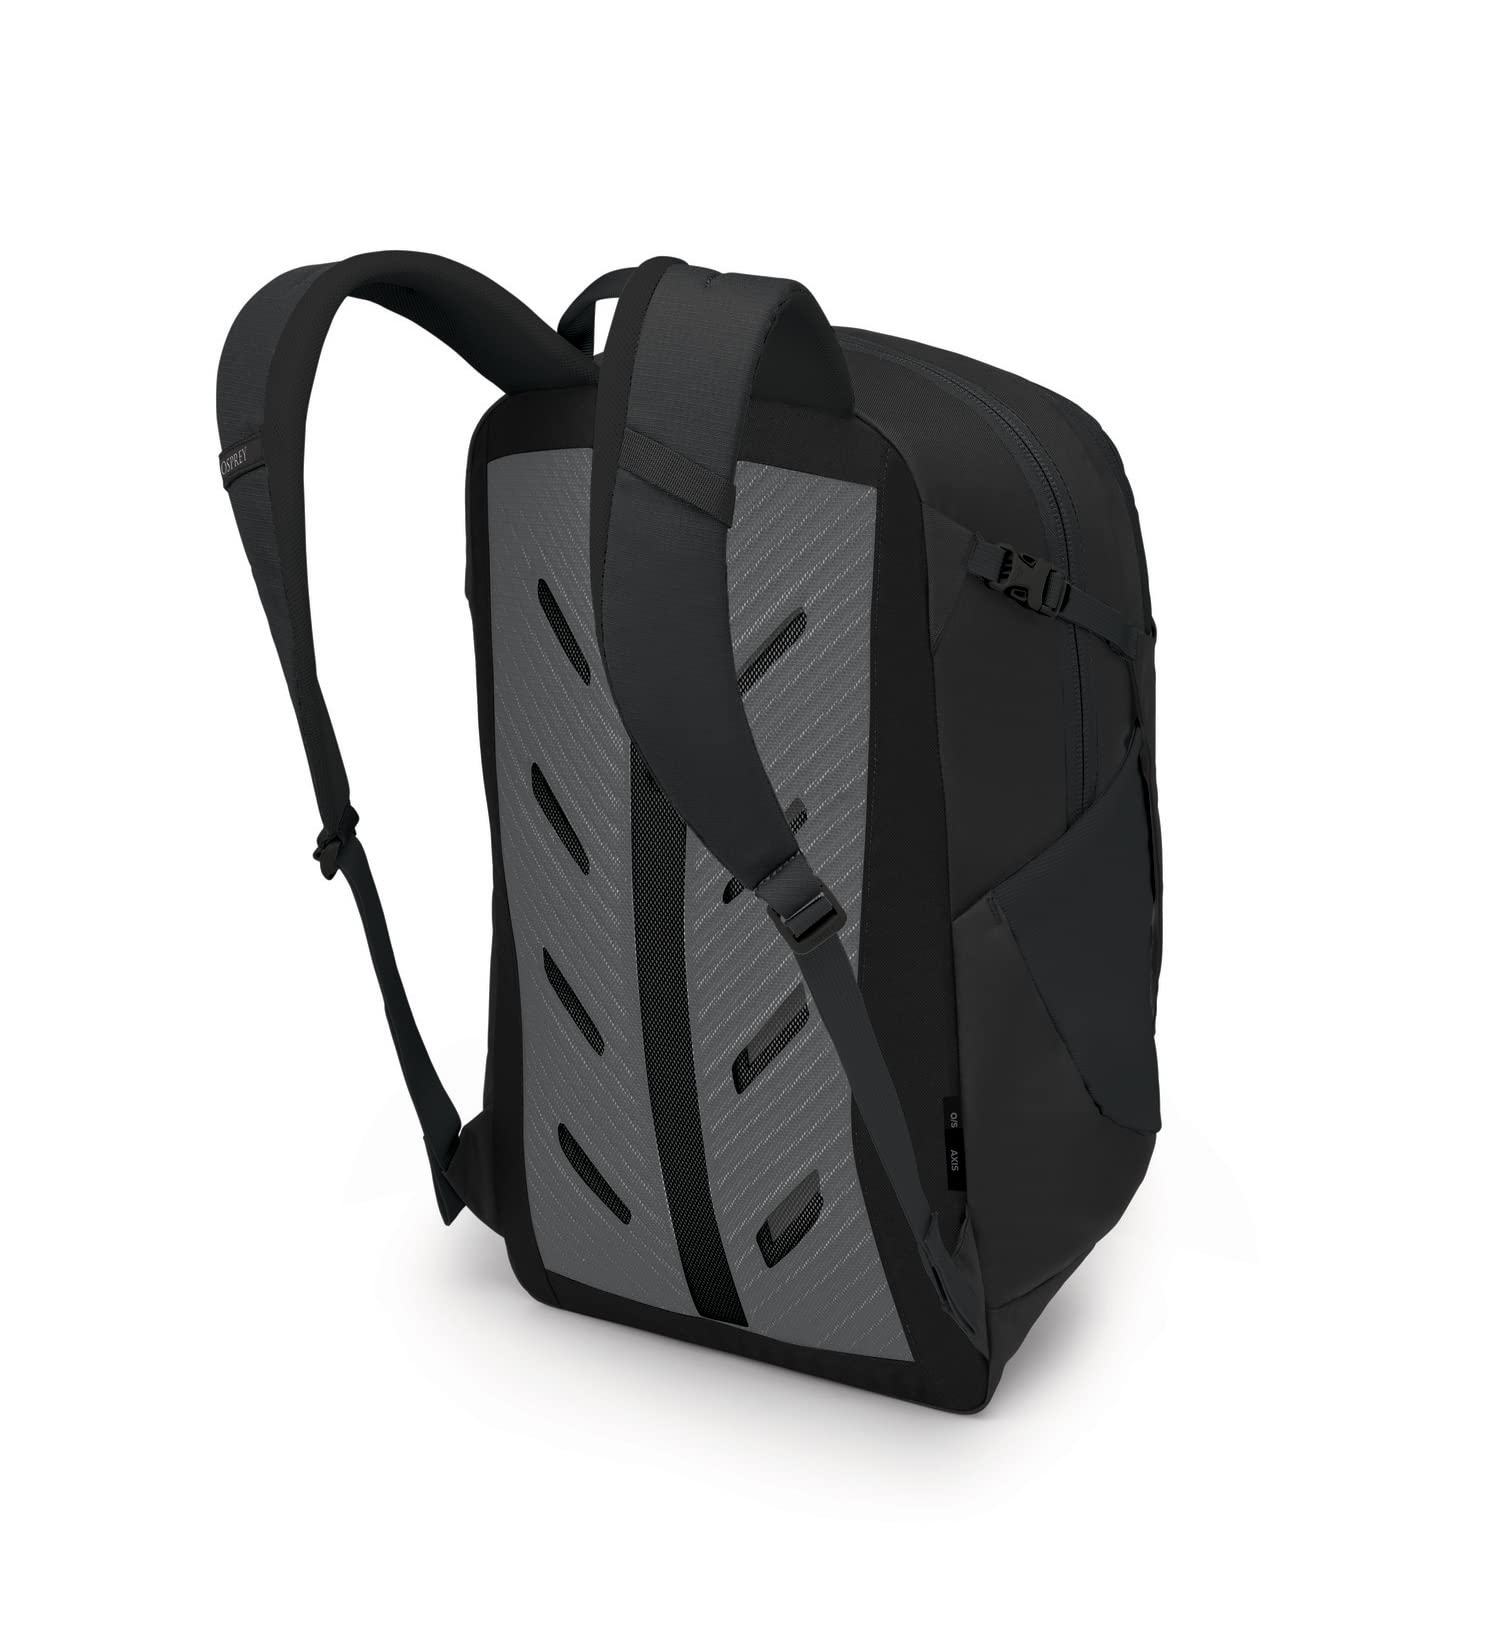 Osprey Packs Axis Laptop Backpack – Luggage Online